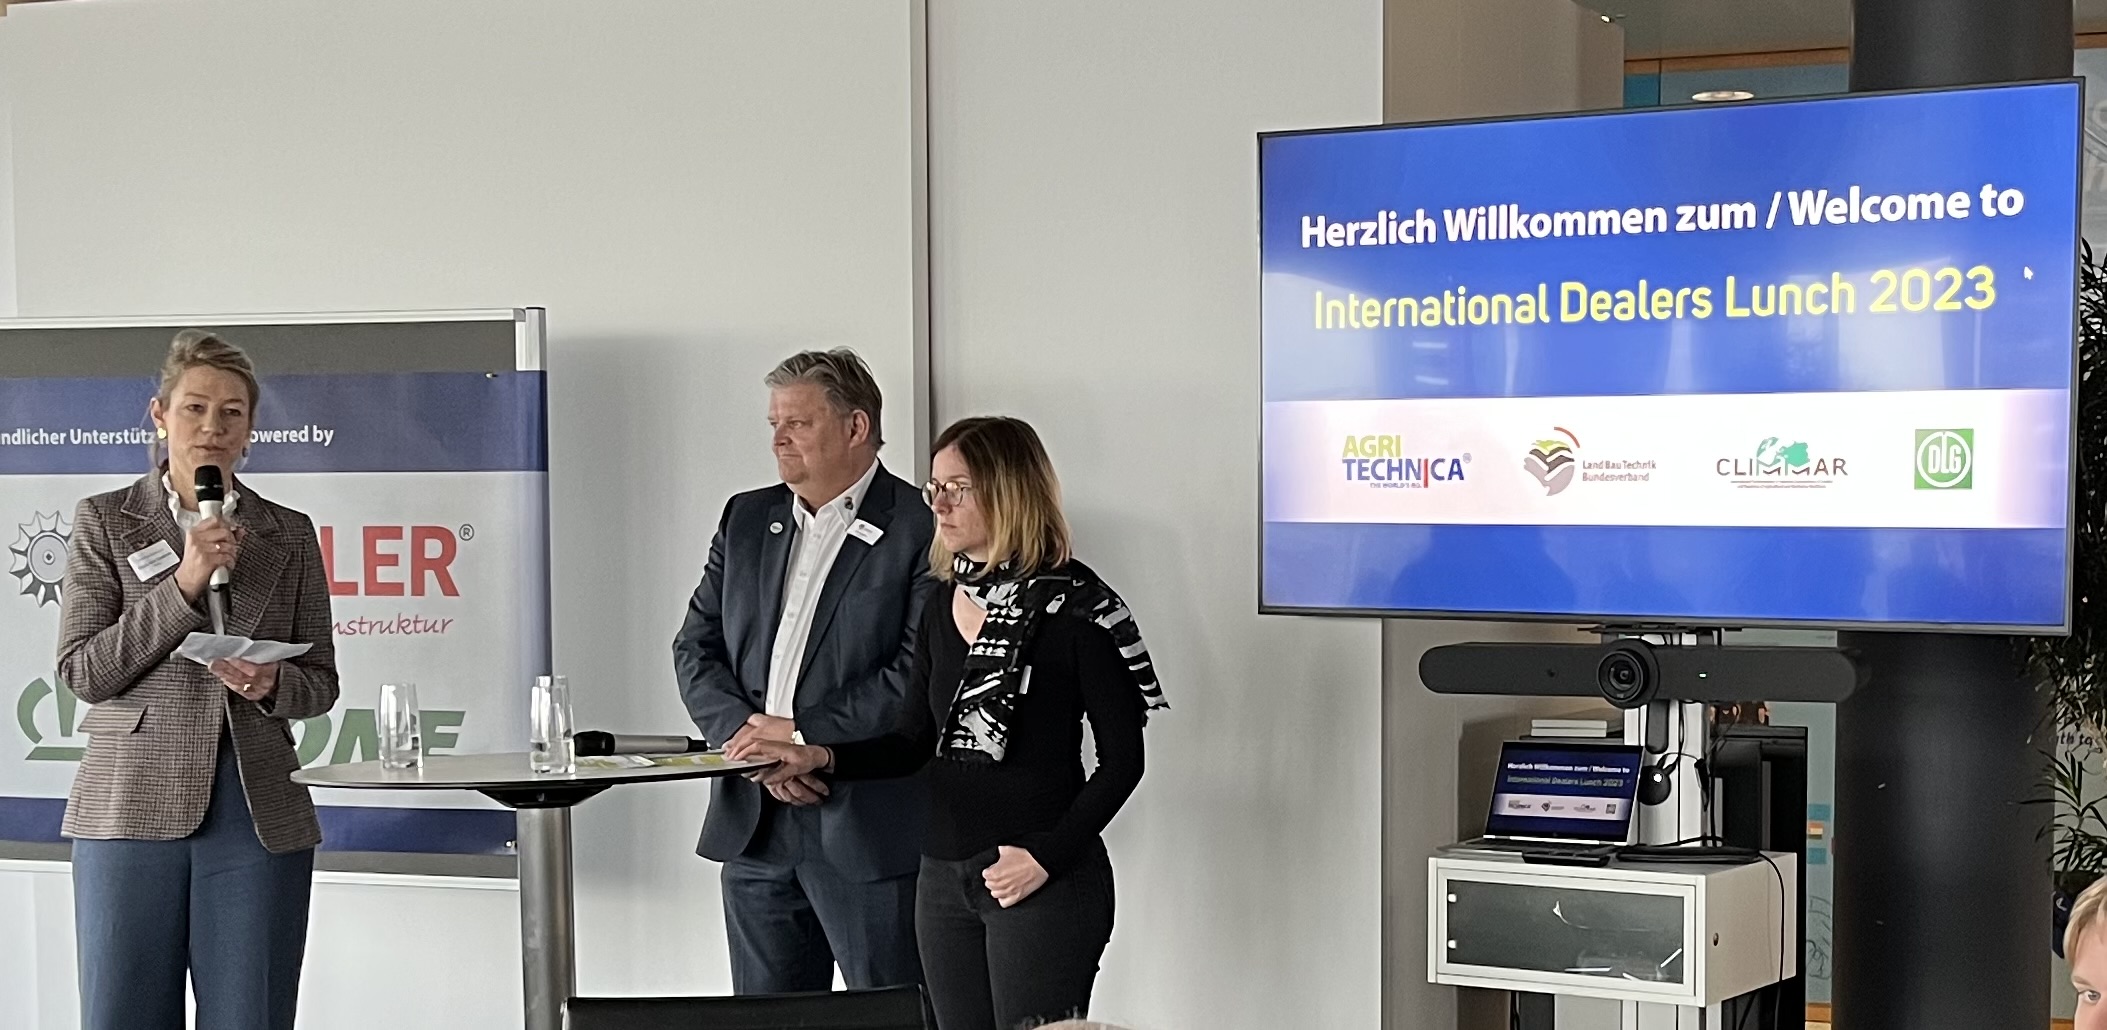 Freya von Czettritz (left) welcomed the participants of the International Dealers Lunch. Ulf Kopplin (centre) and Christina Alff (right) then spoke about the issues affecting the industry